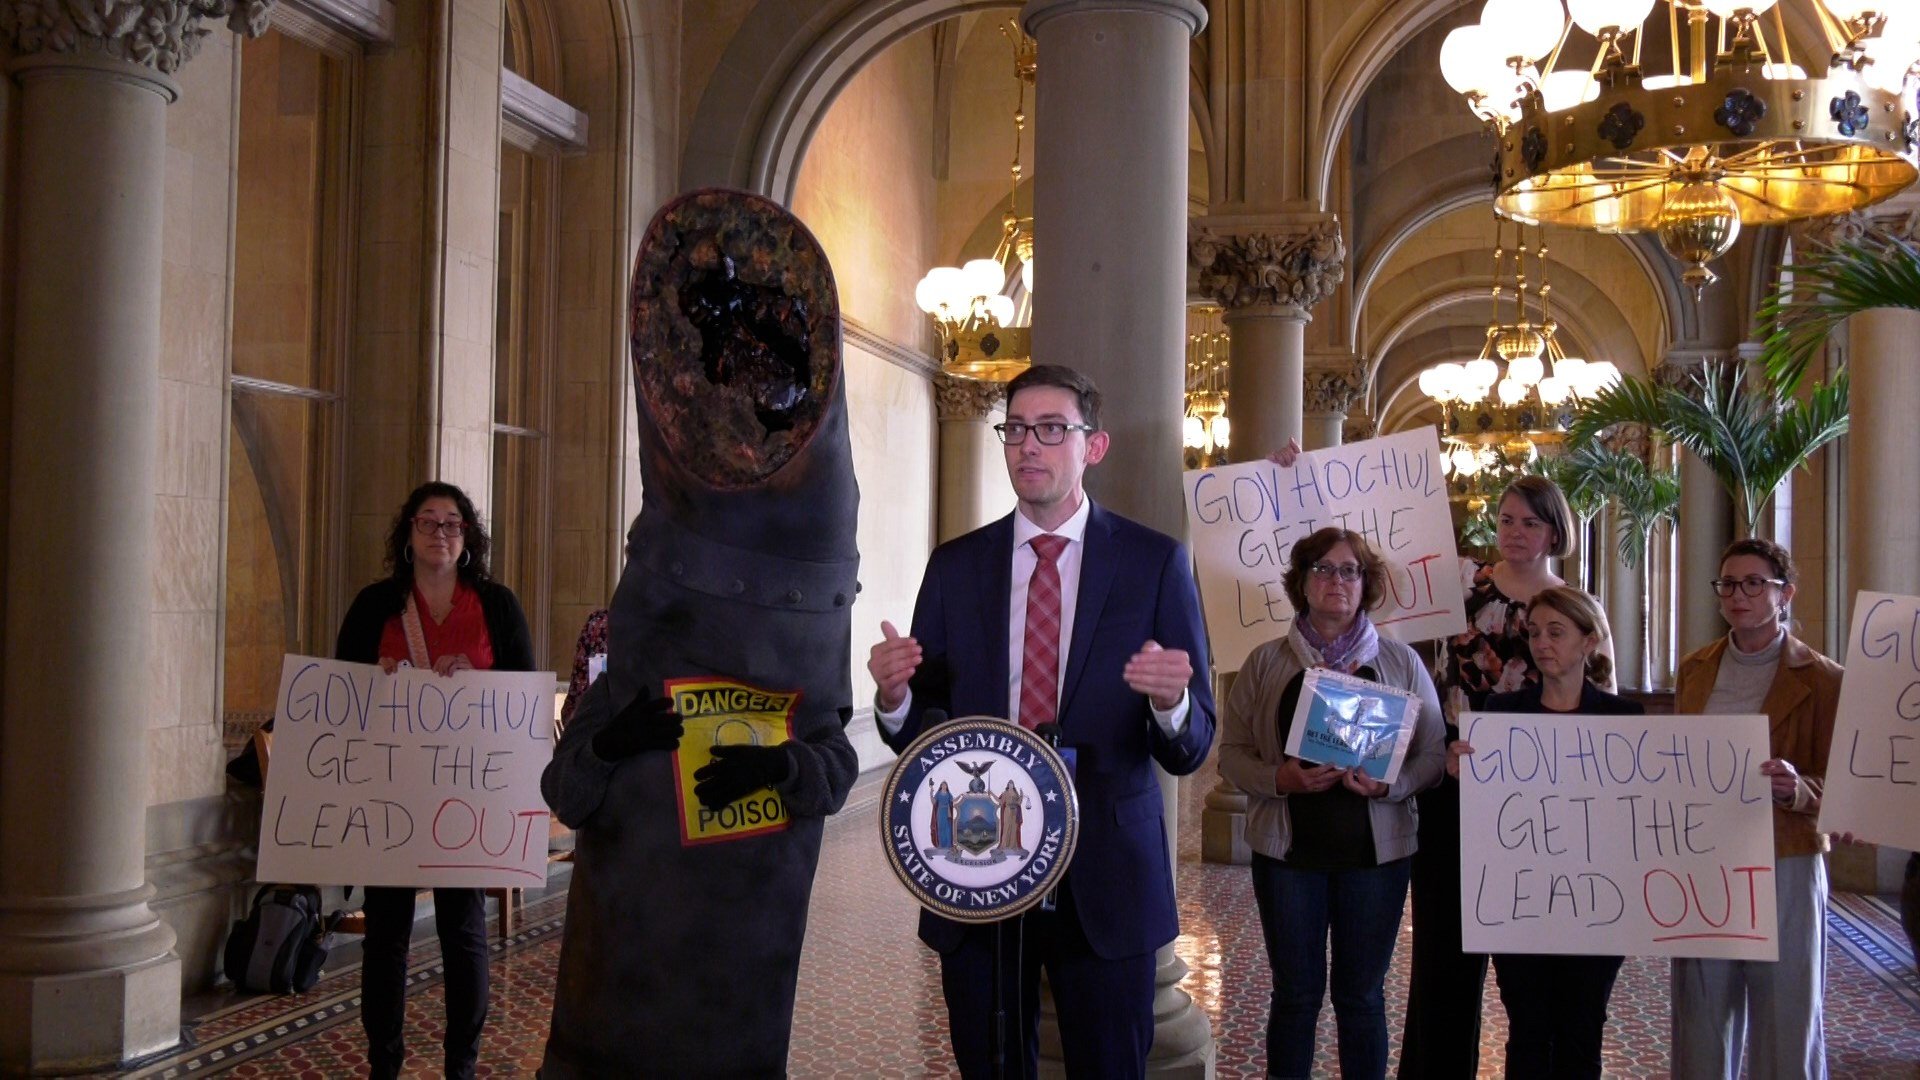 A rally to combat lead pipelines in New York